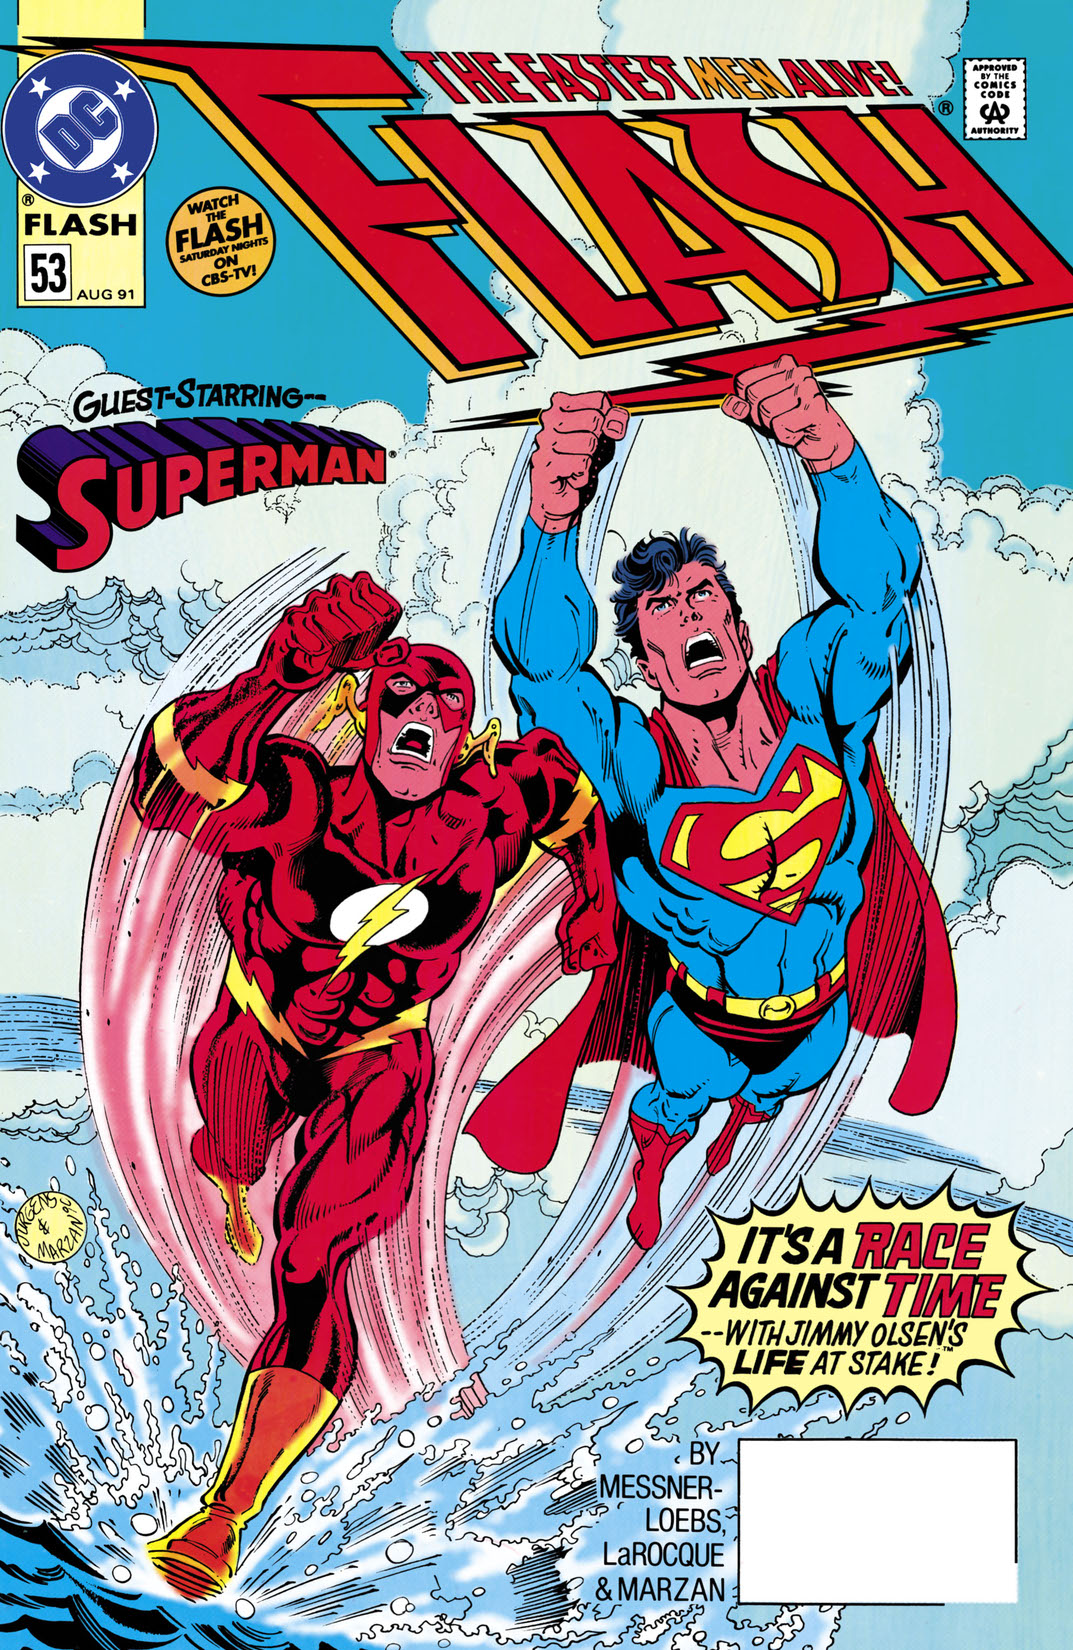 The Flash (1987-) #53 preview images